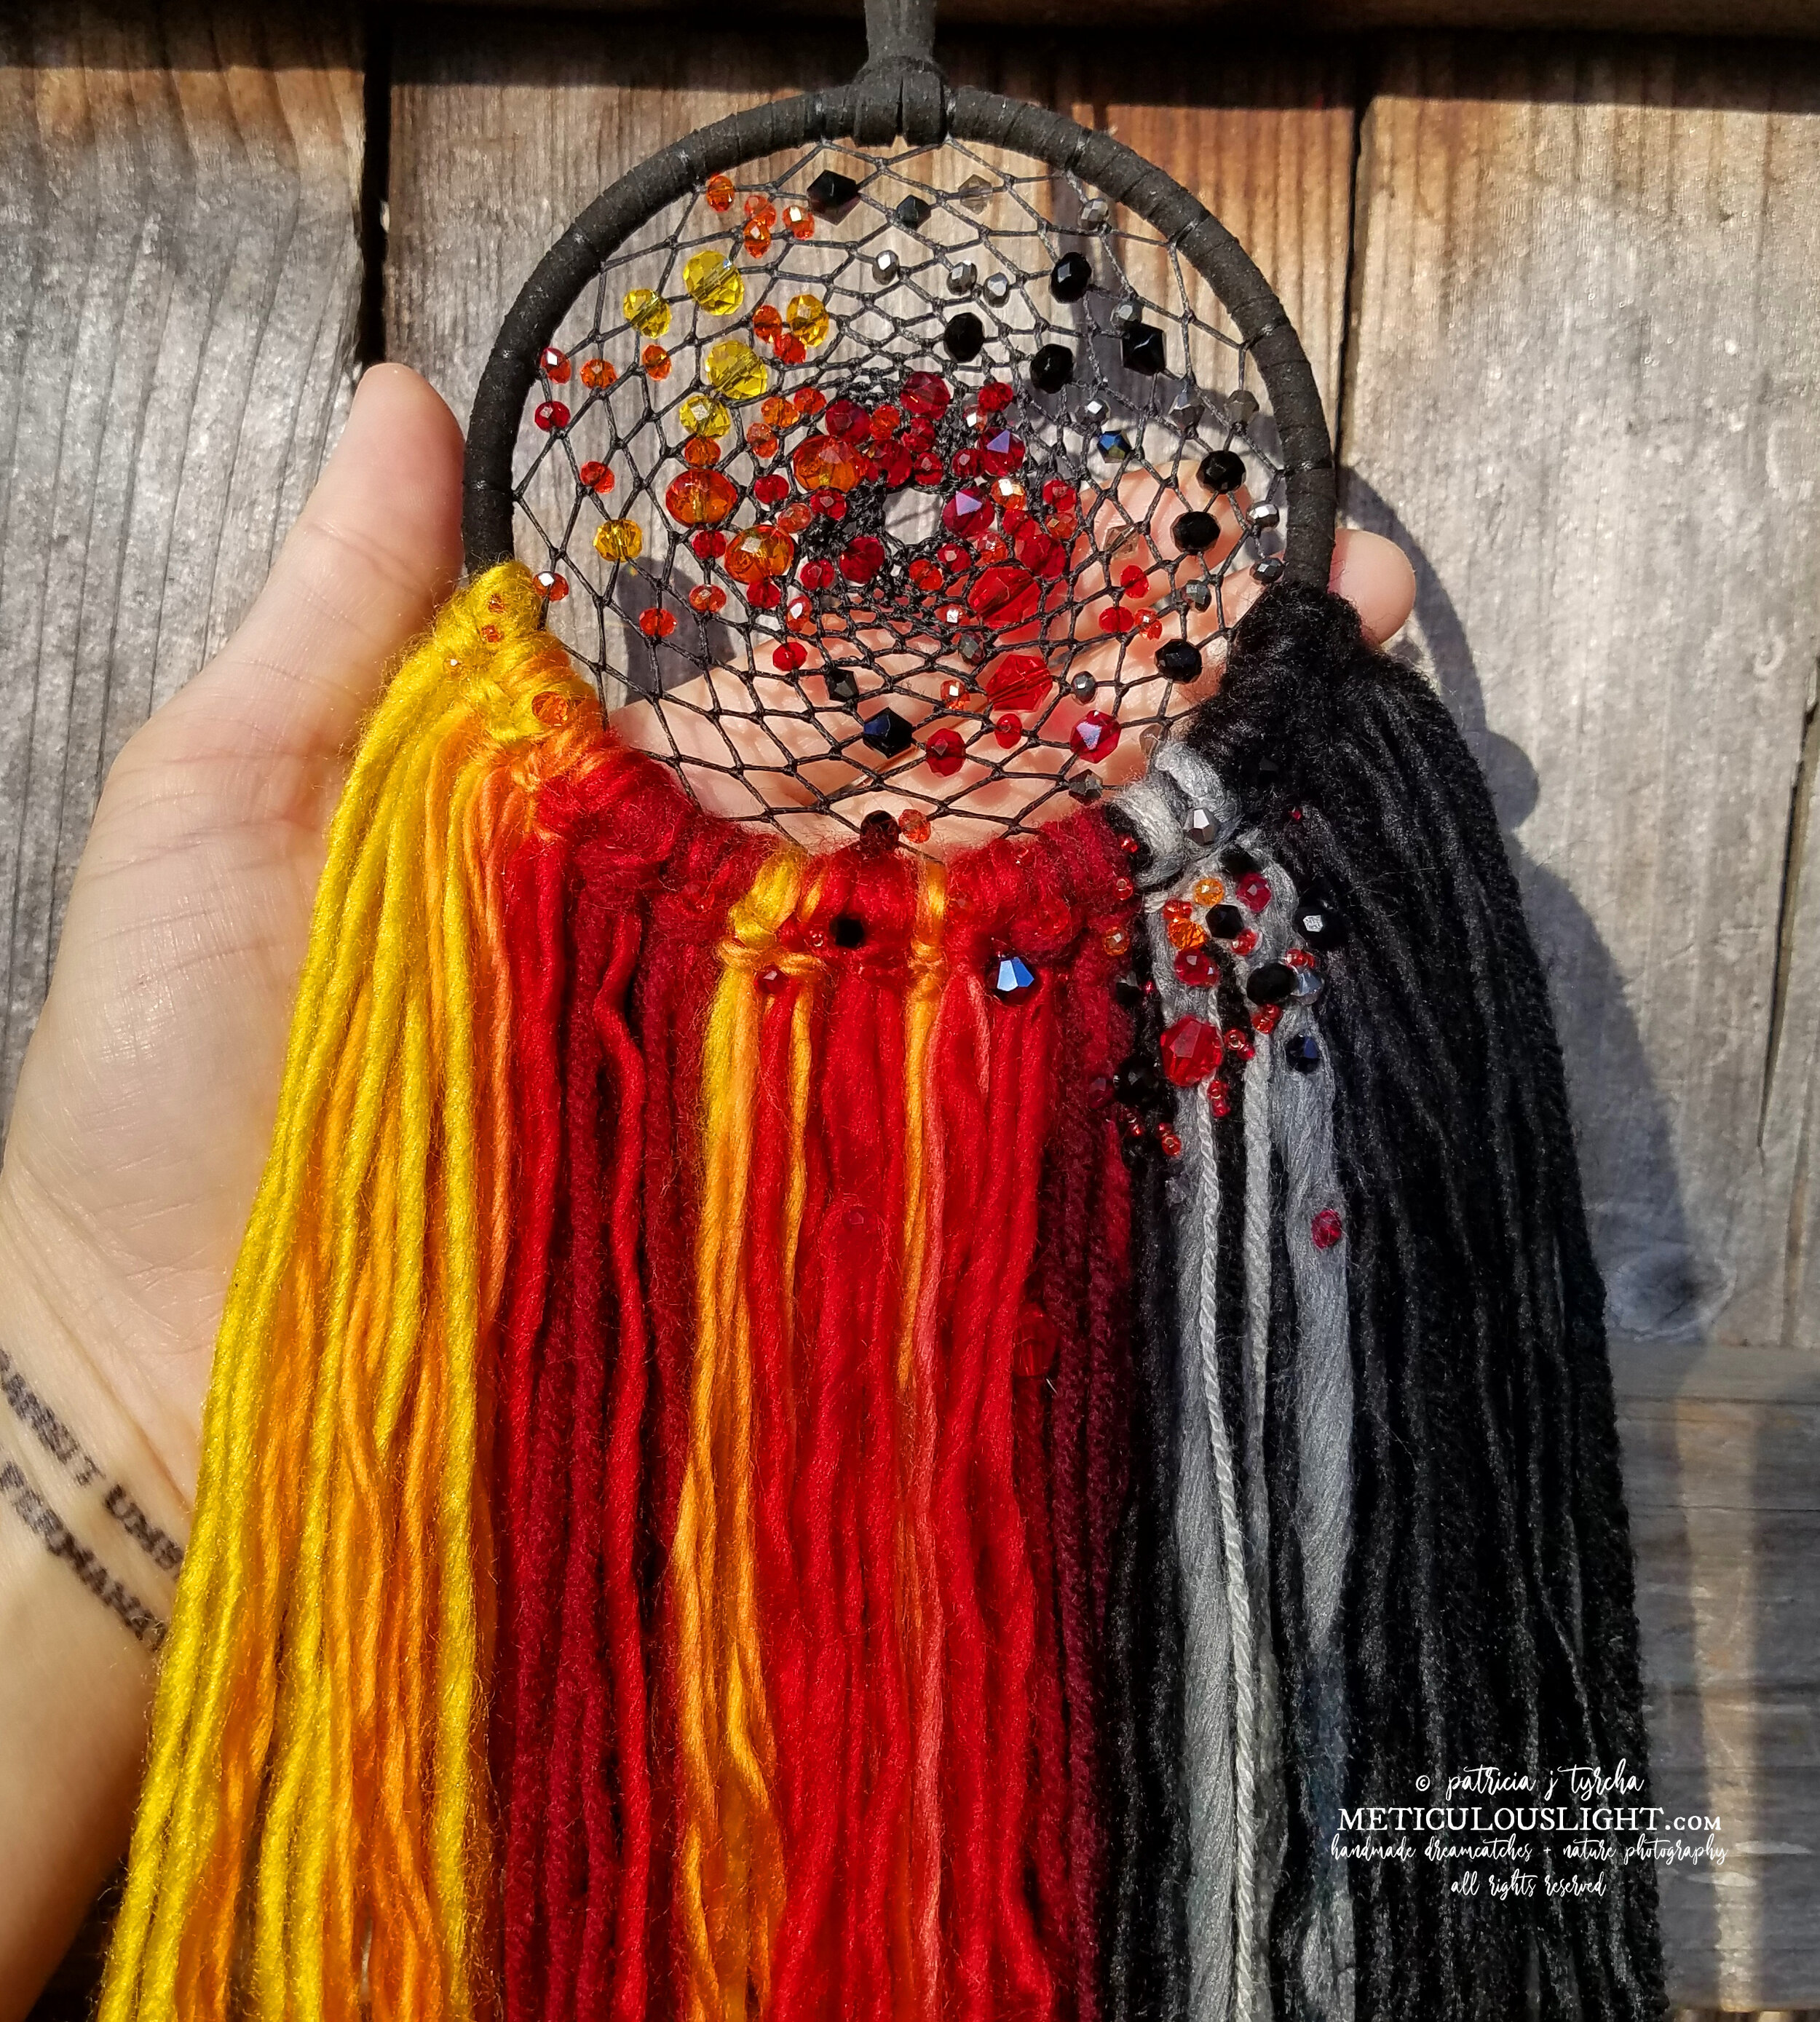 © patricia j tyrcha Firefighter Dream Catcher, unique, modern, fire protection, with yarn, beads, modern ALL RIGHTS RESERVED METICULOUSLIGHT6w.jpg